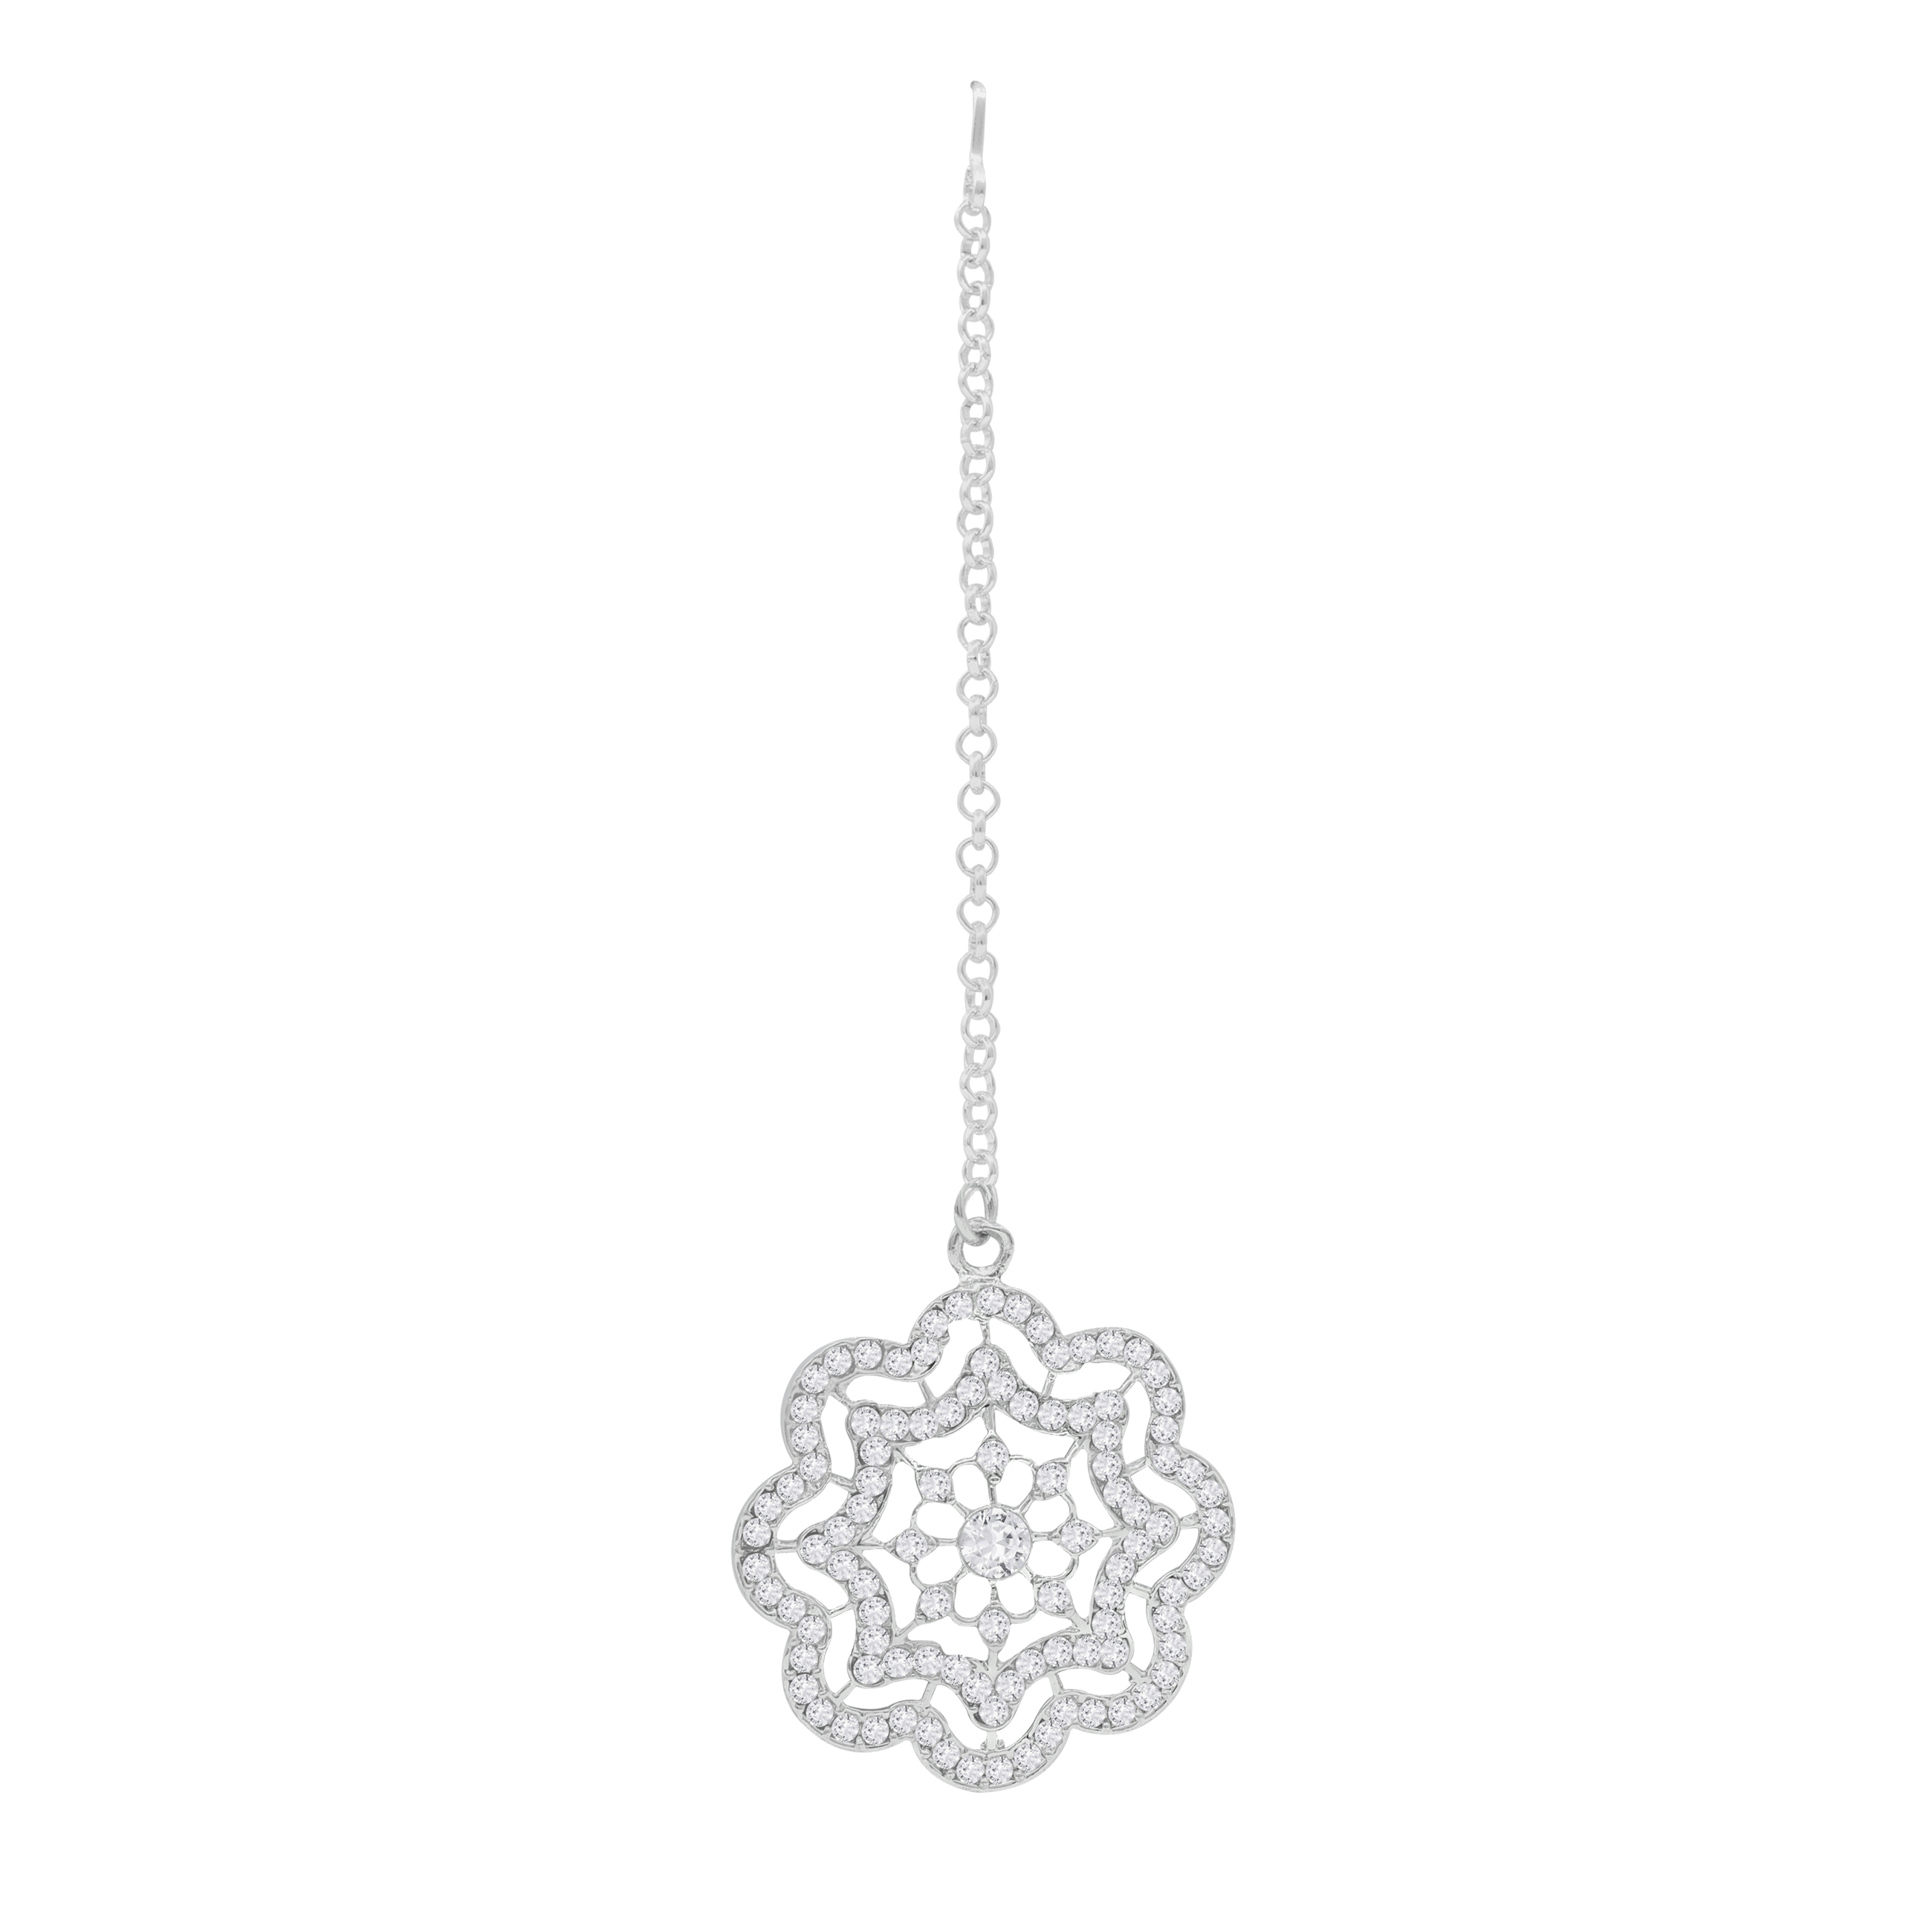 Floral Luster - Austrian Stone Silver Plated Choker Set